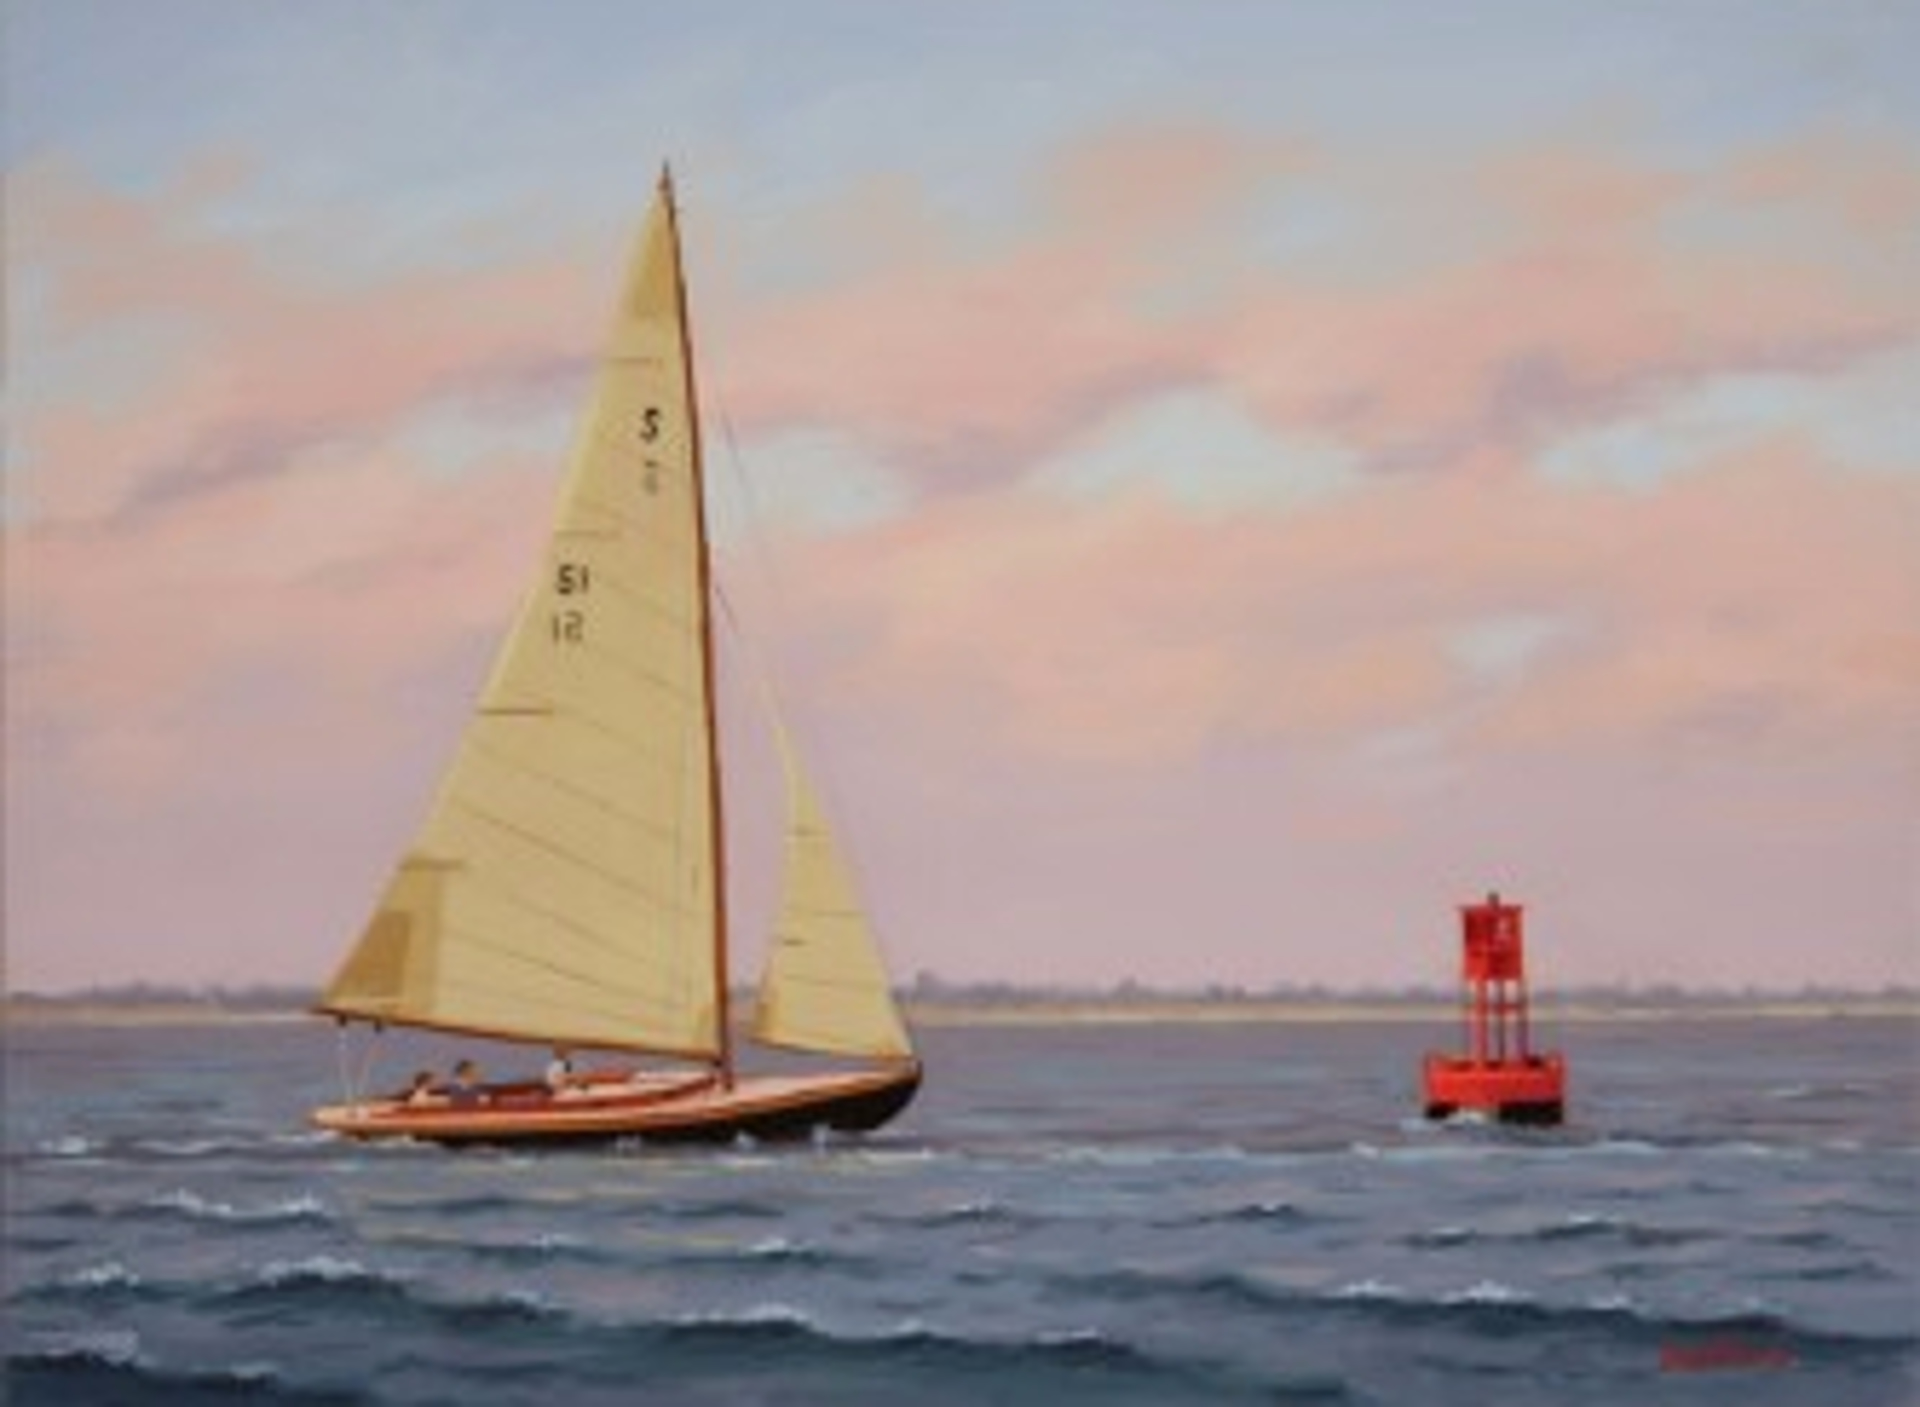 Sailing toward the Buoy by James Wolford